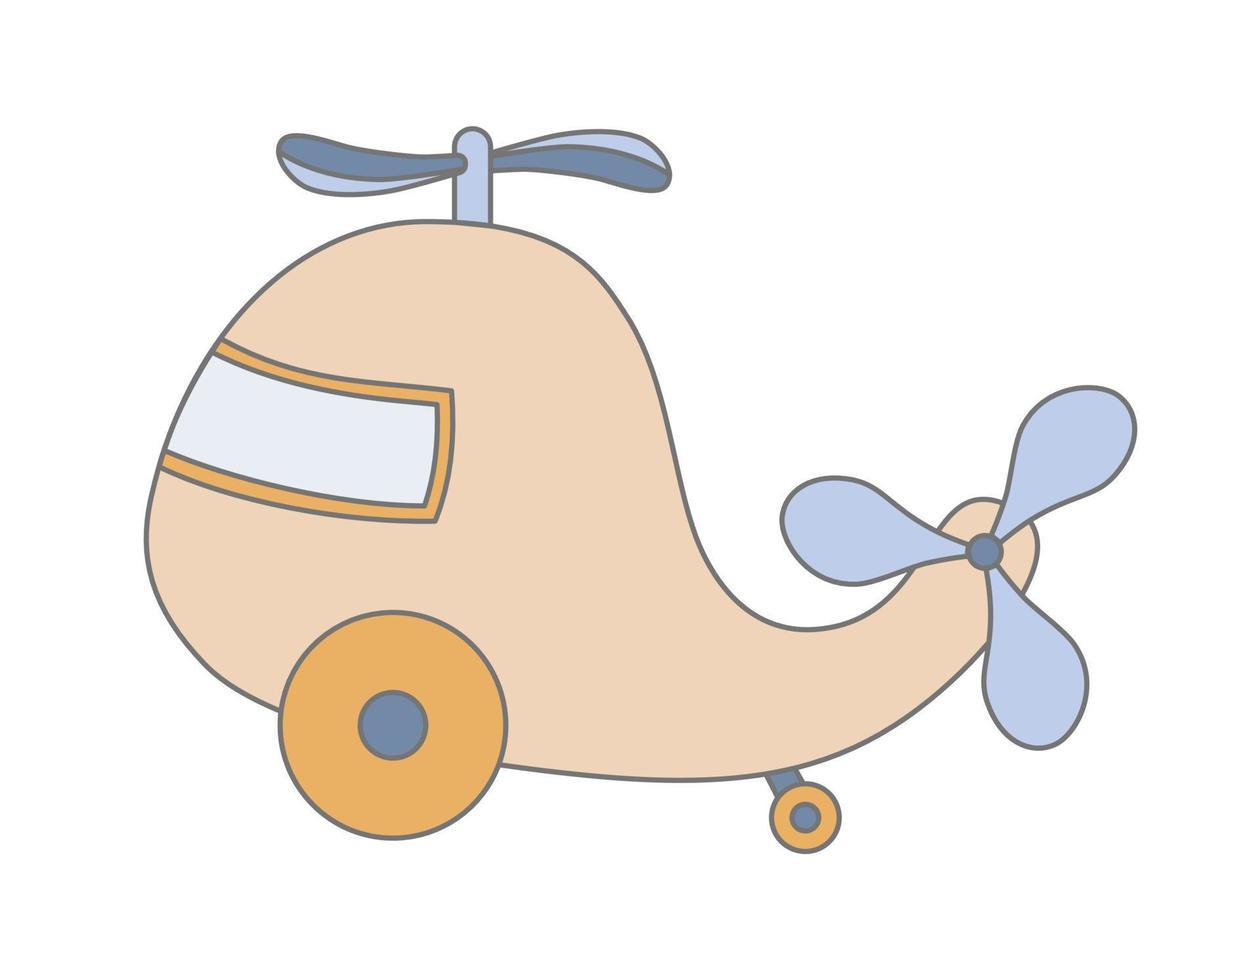 Helicopter wooden Kid Toy. Airplane for Baby Boy. Vector hand drawn illustration for happy childhood on white background. Cute sketch of Plane